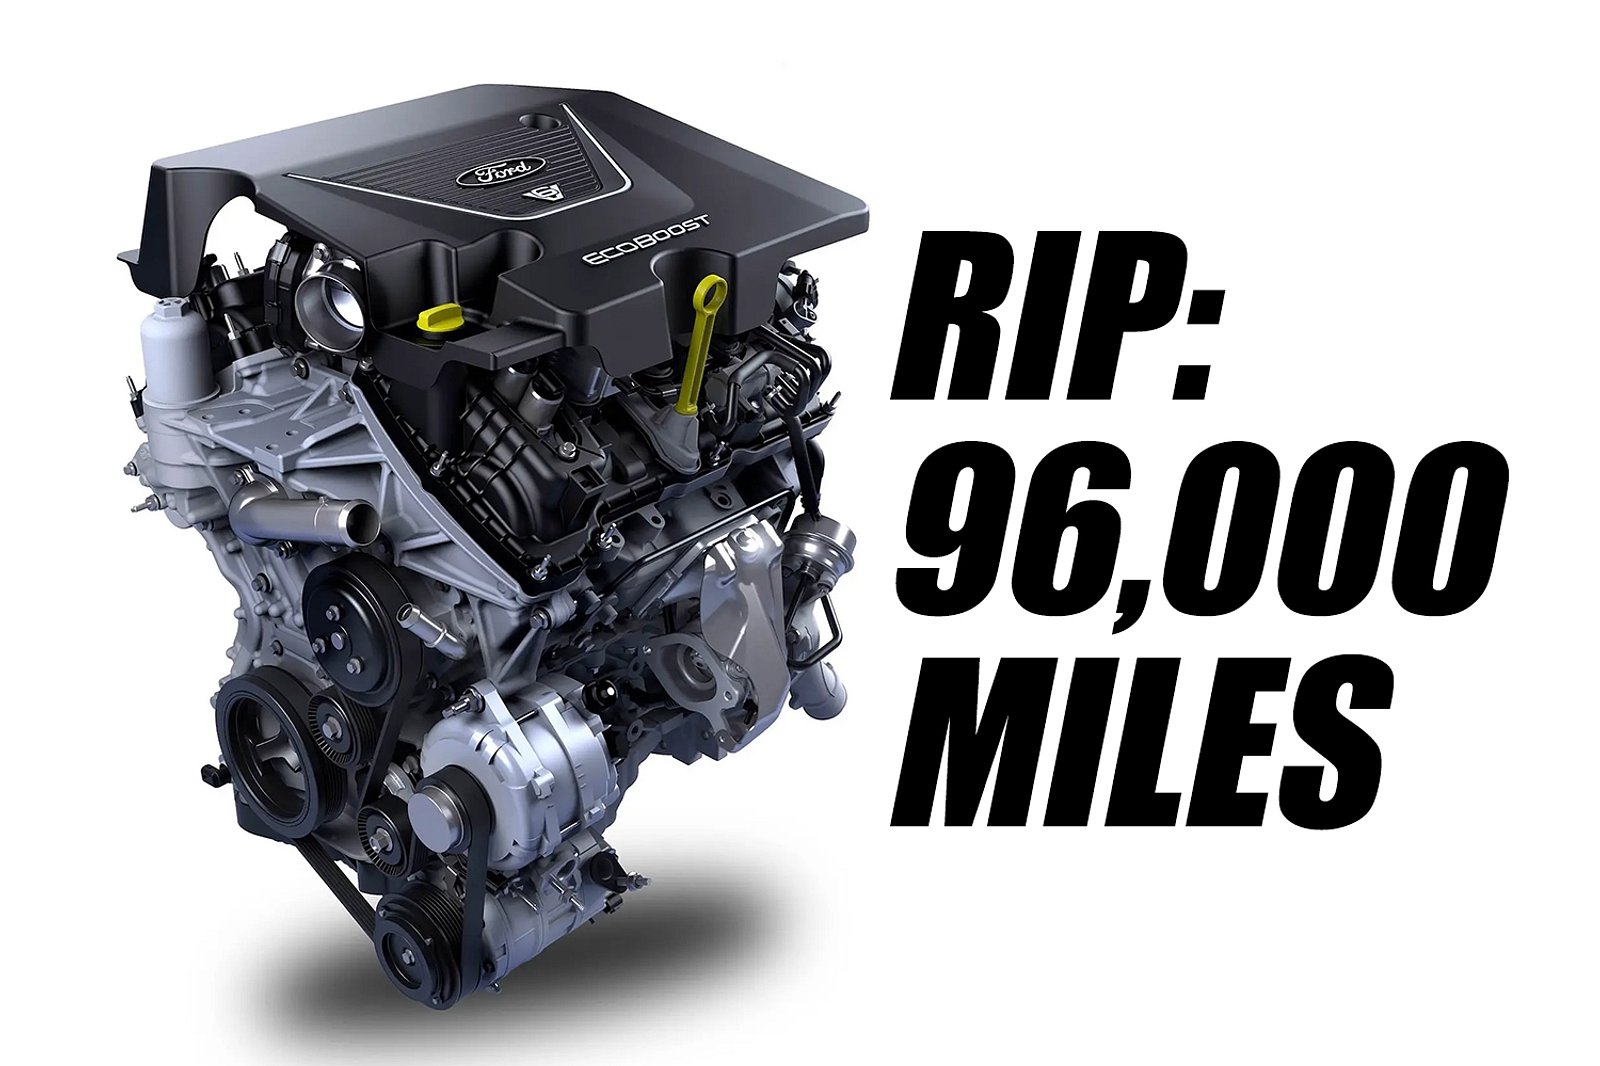 video, engine teardown shows why ford f-150's ecoboost v6 died at 96k miles